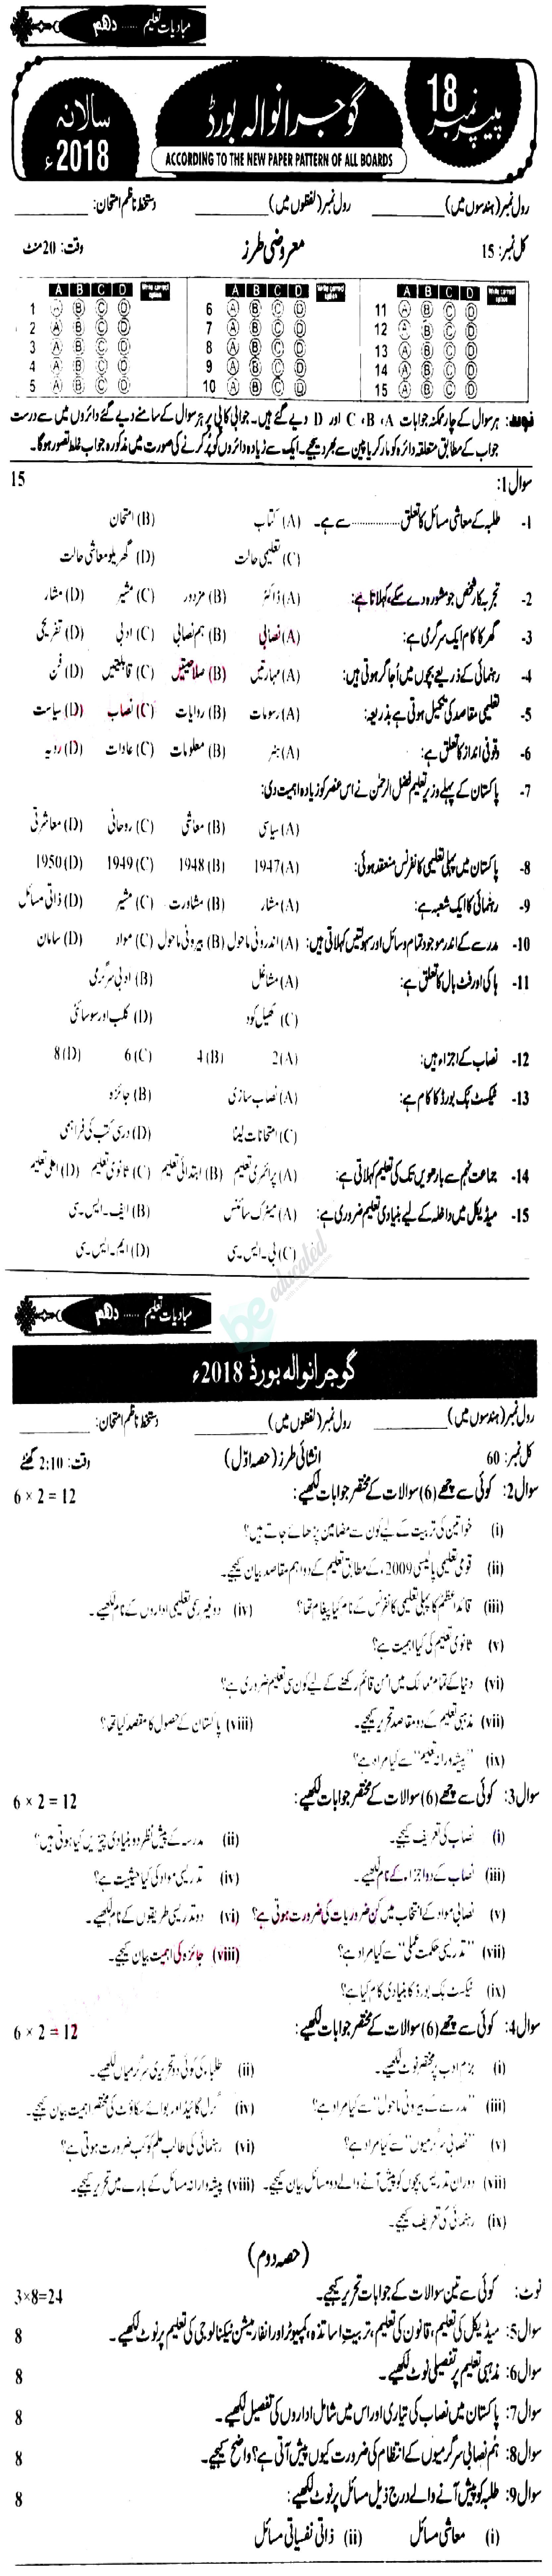 Education 10th class Past Paper Group 1 BISE Gujranwala 2018